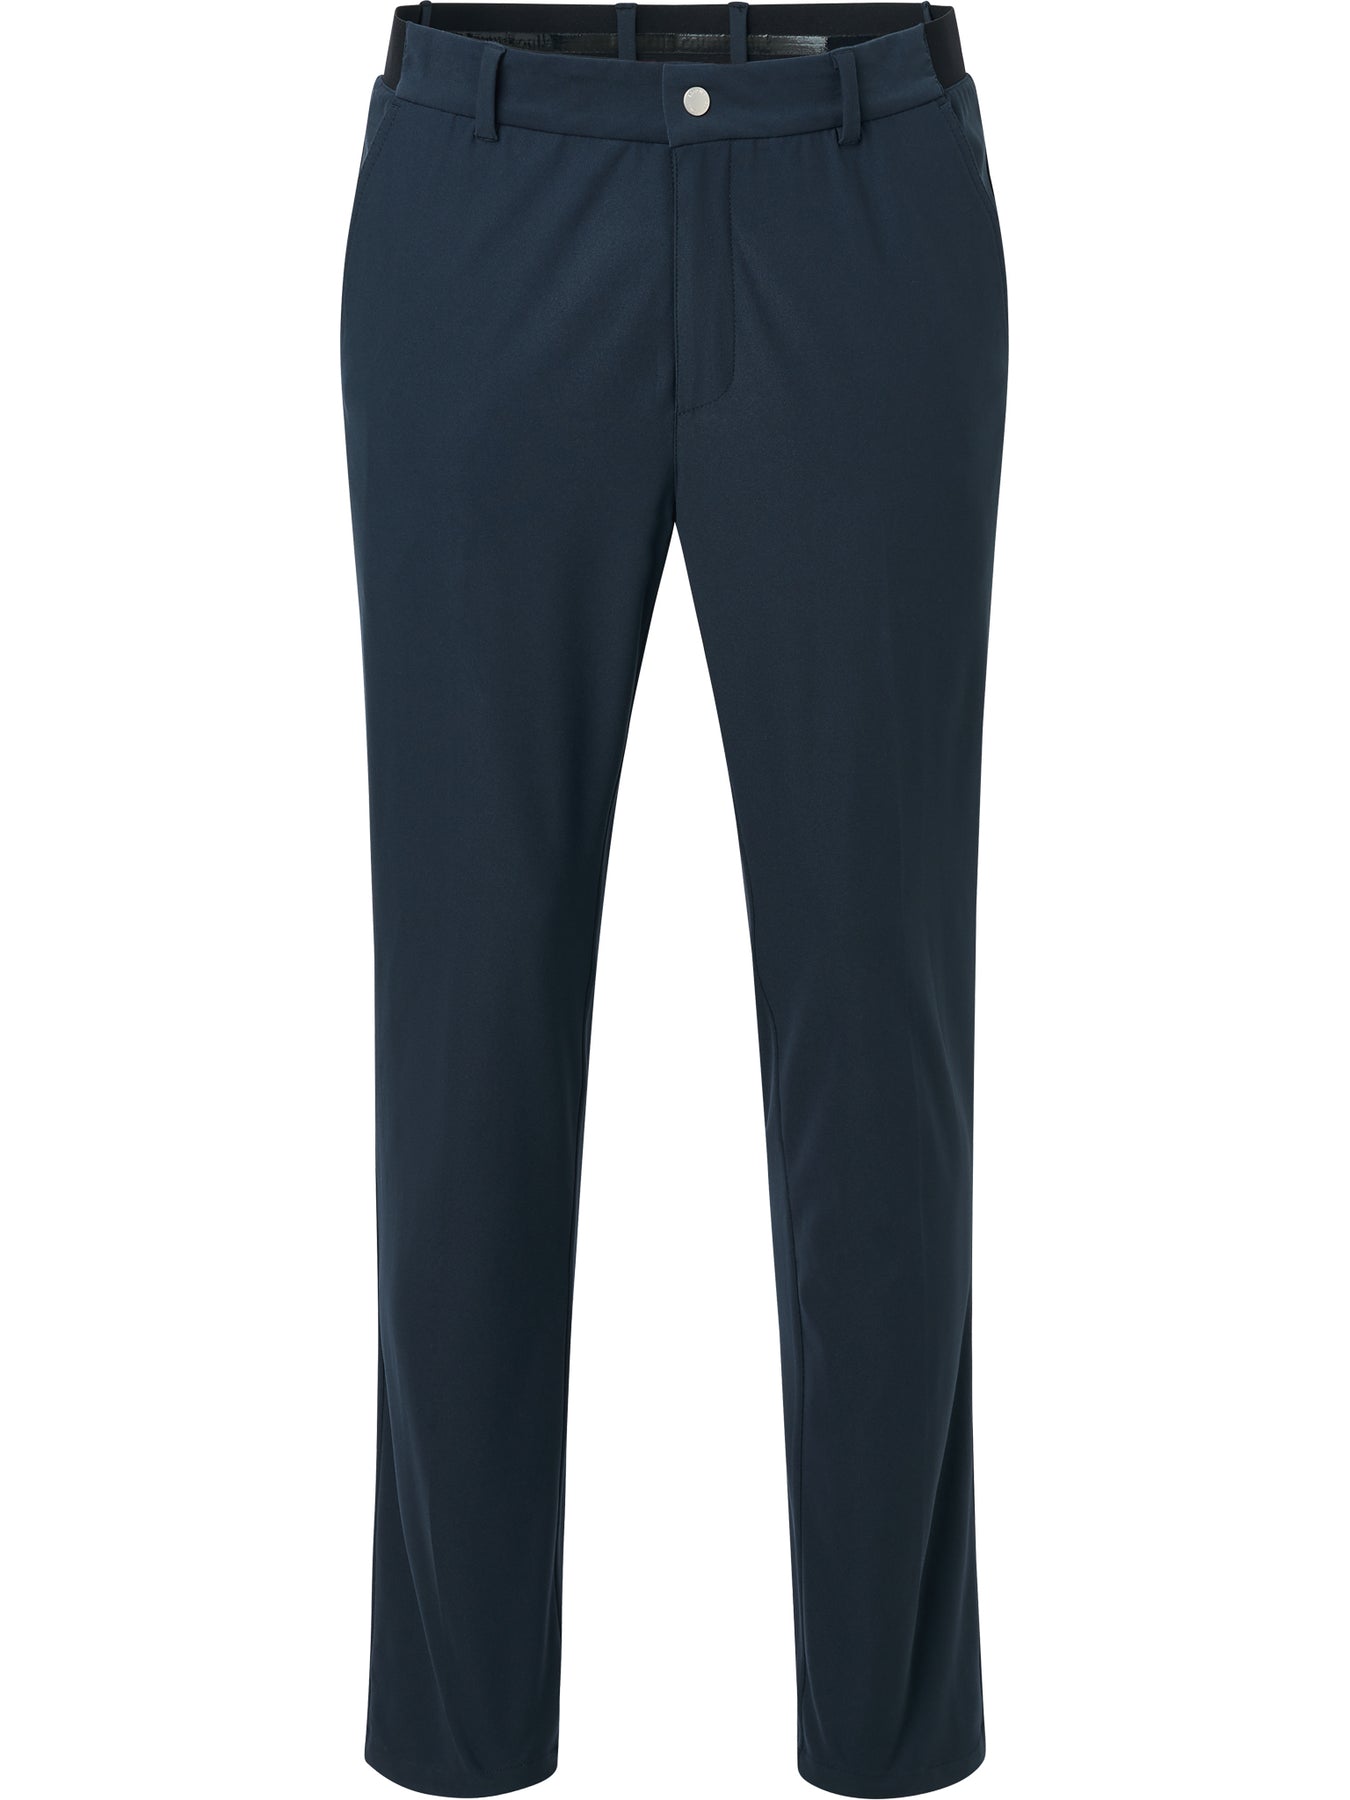 Abacus Sports Wear: Men’s 4 Way Stretch Trousers – Mellion